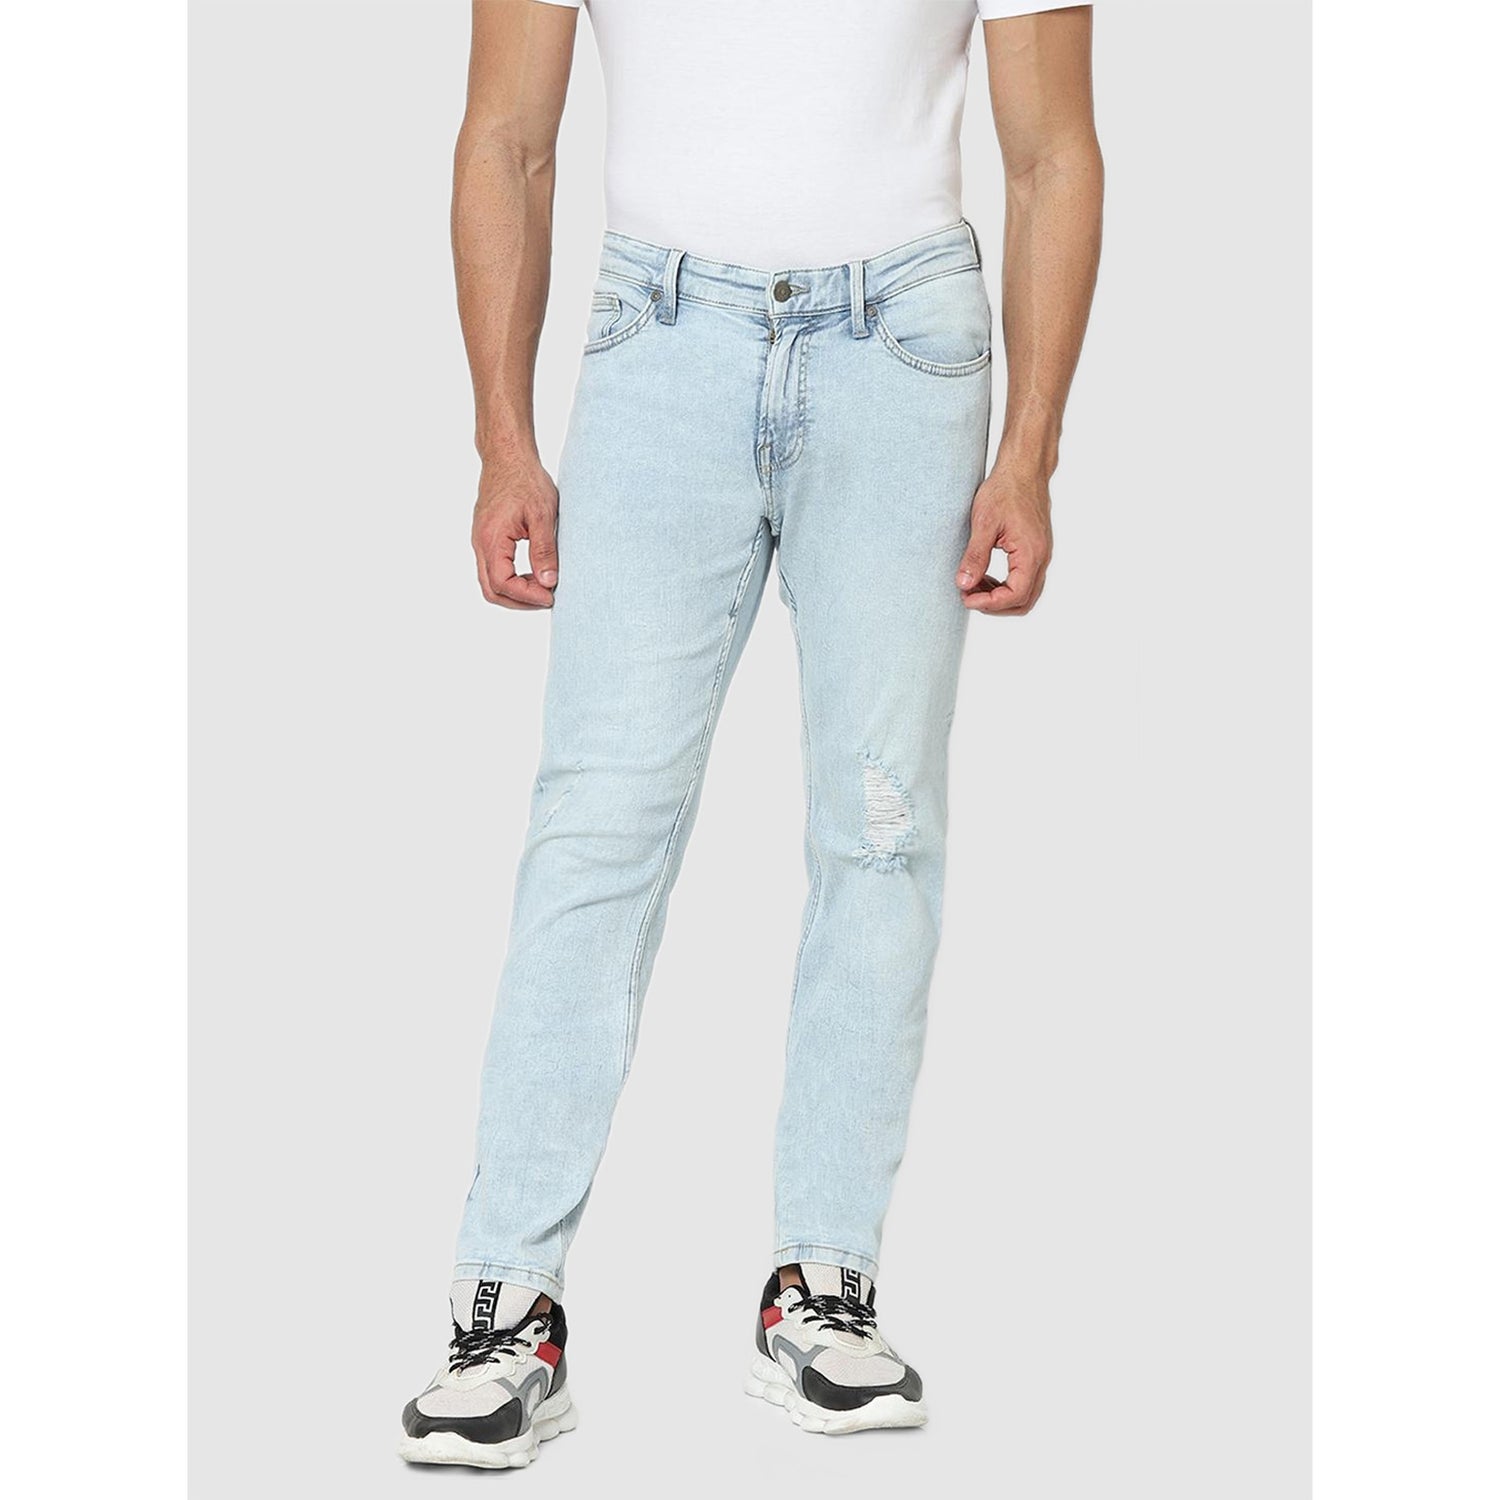 Blue Slim Fit Mildly Distressed Heavy Fade Jeans (BODESTROYS)